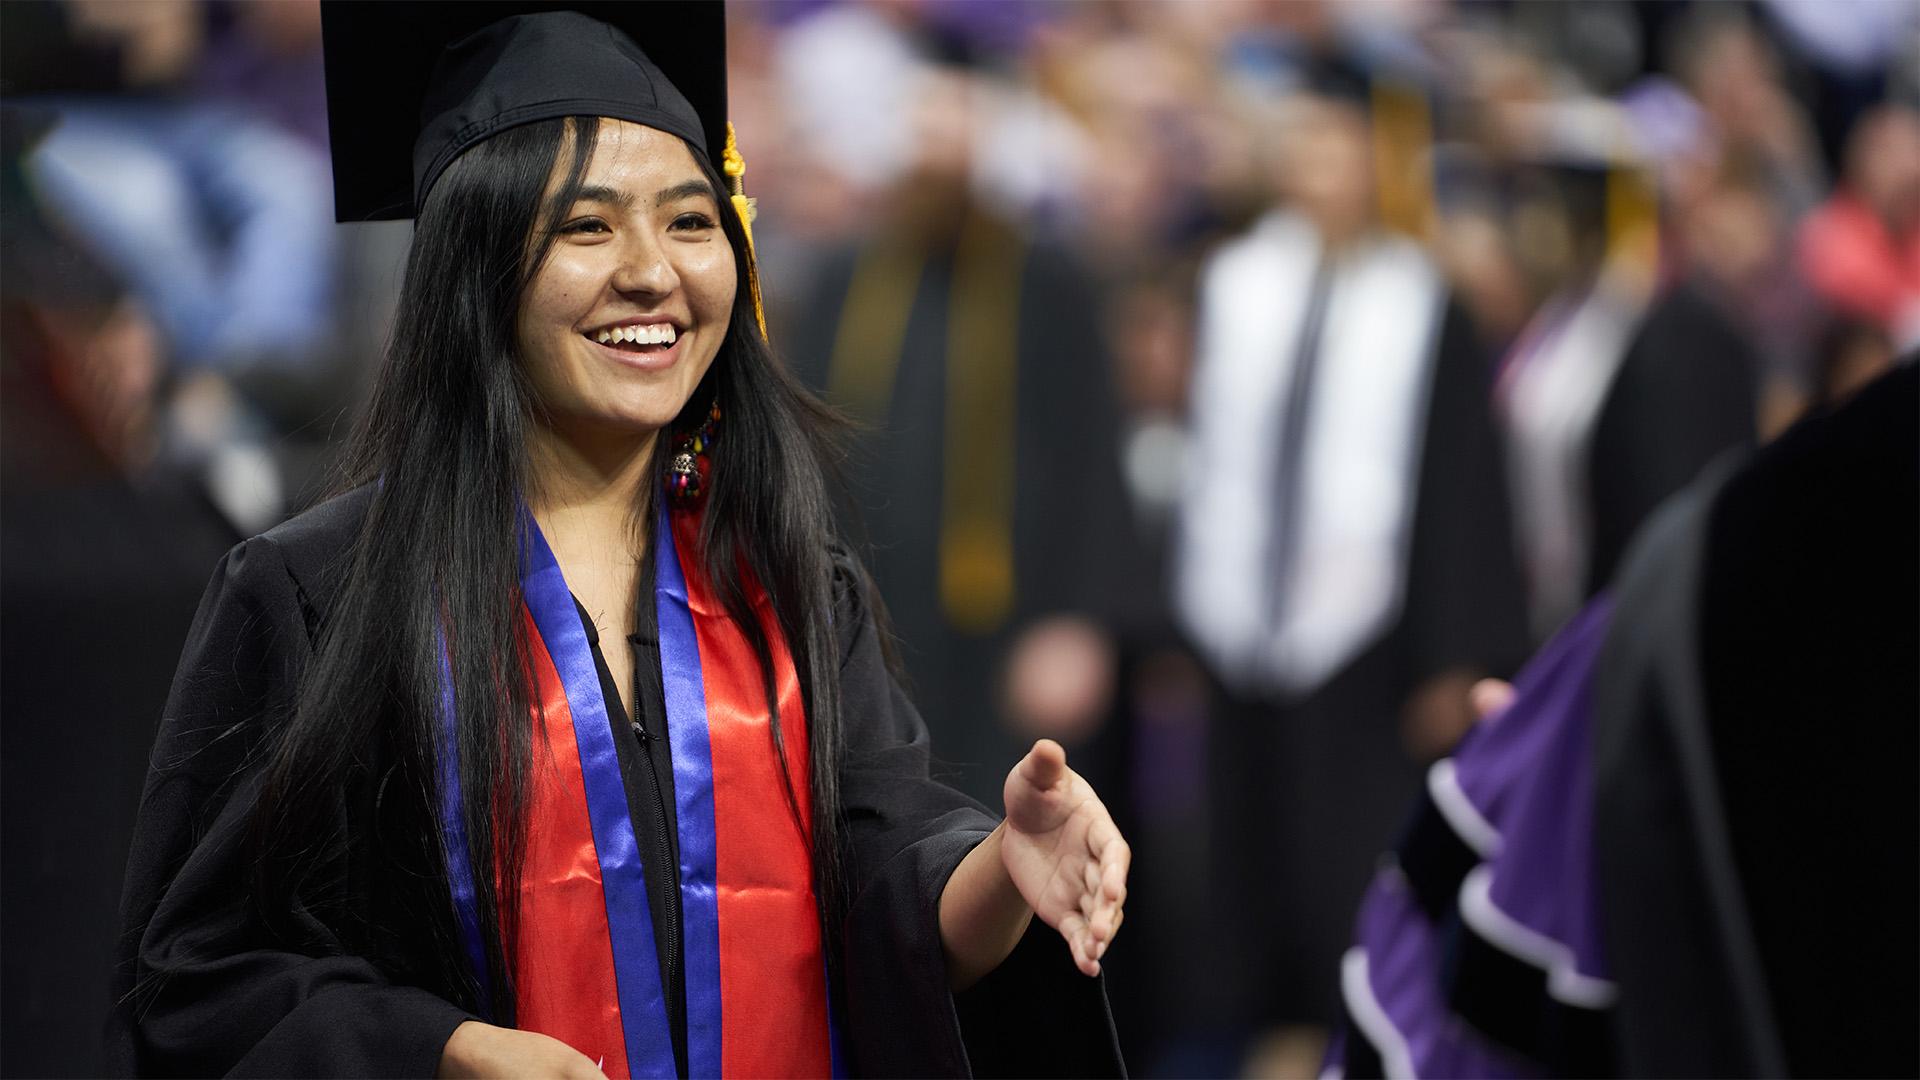 UE graduate shaking hand at commencement